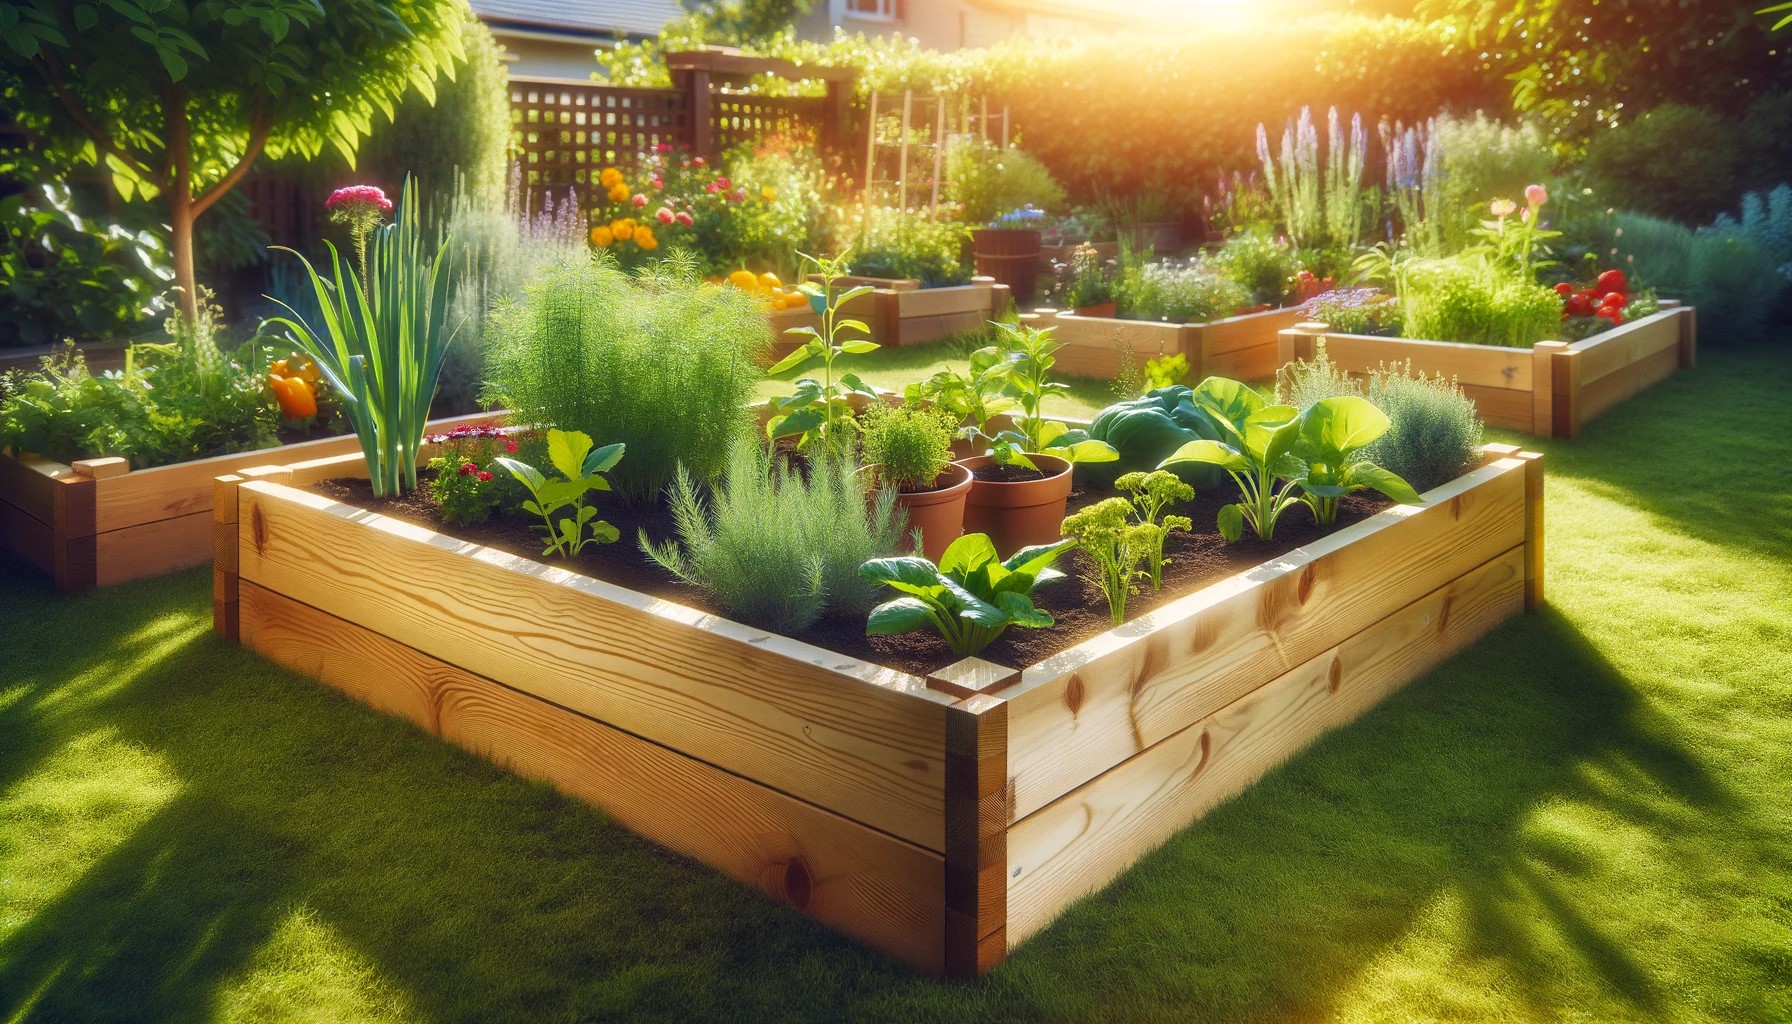 A sunny garden space with a neatly constructed DIY raised garden bed, filled with vibrant plants such as vegetables, herbs, flowers, and shrubs